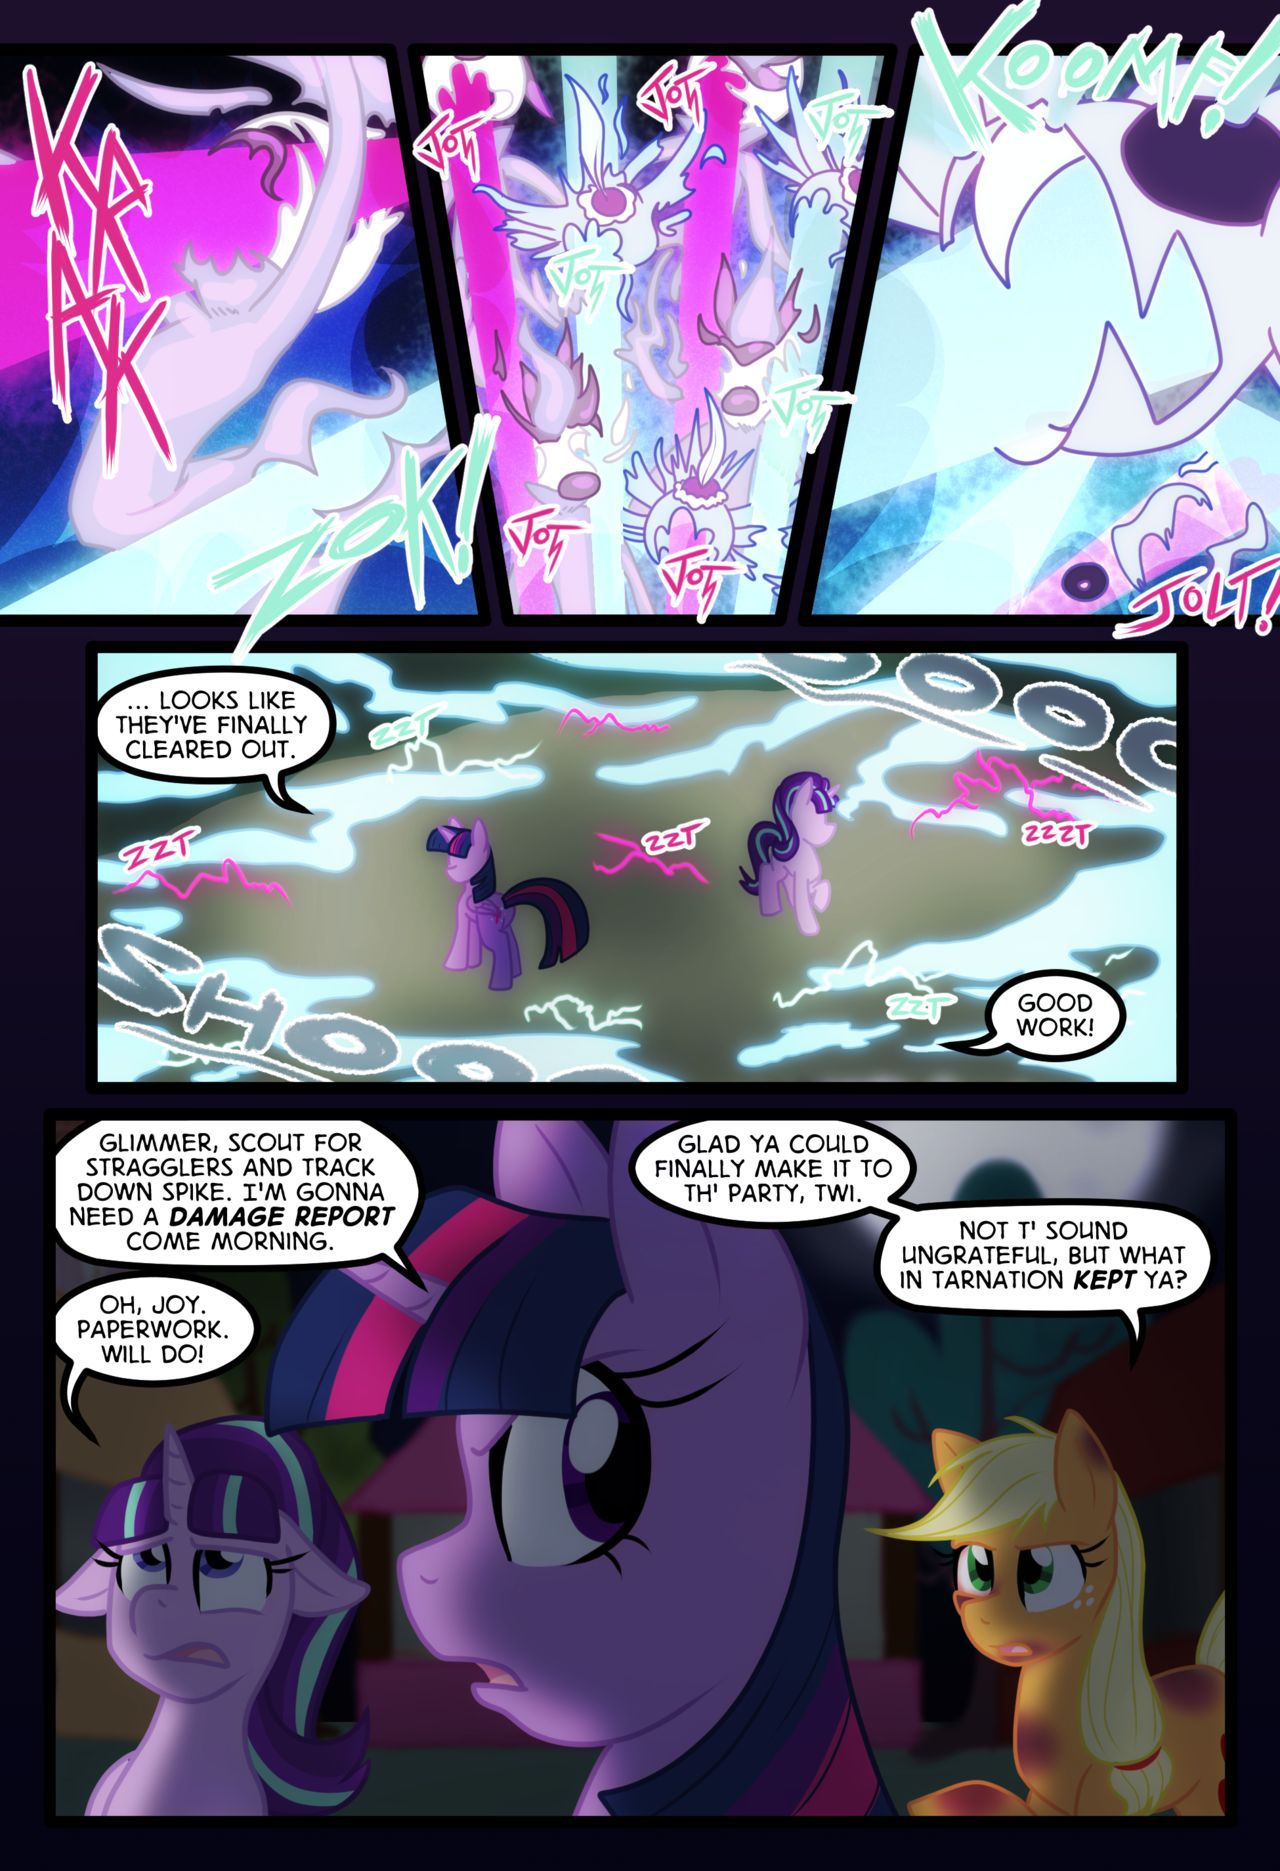 [Zaron] Lonely Hooves (My Little Pony Friendship Is Magic) [Ongoing] 163